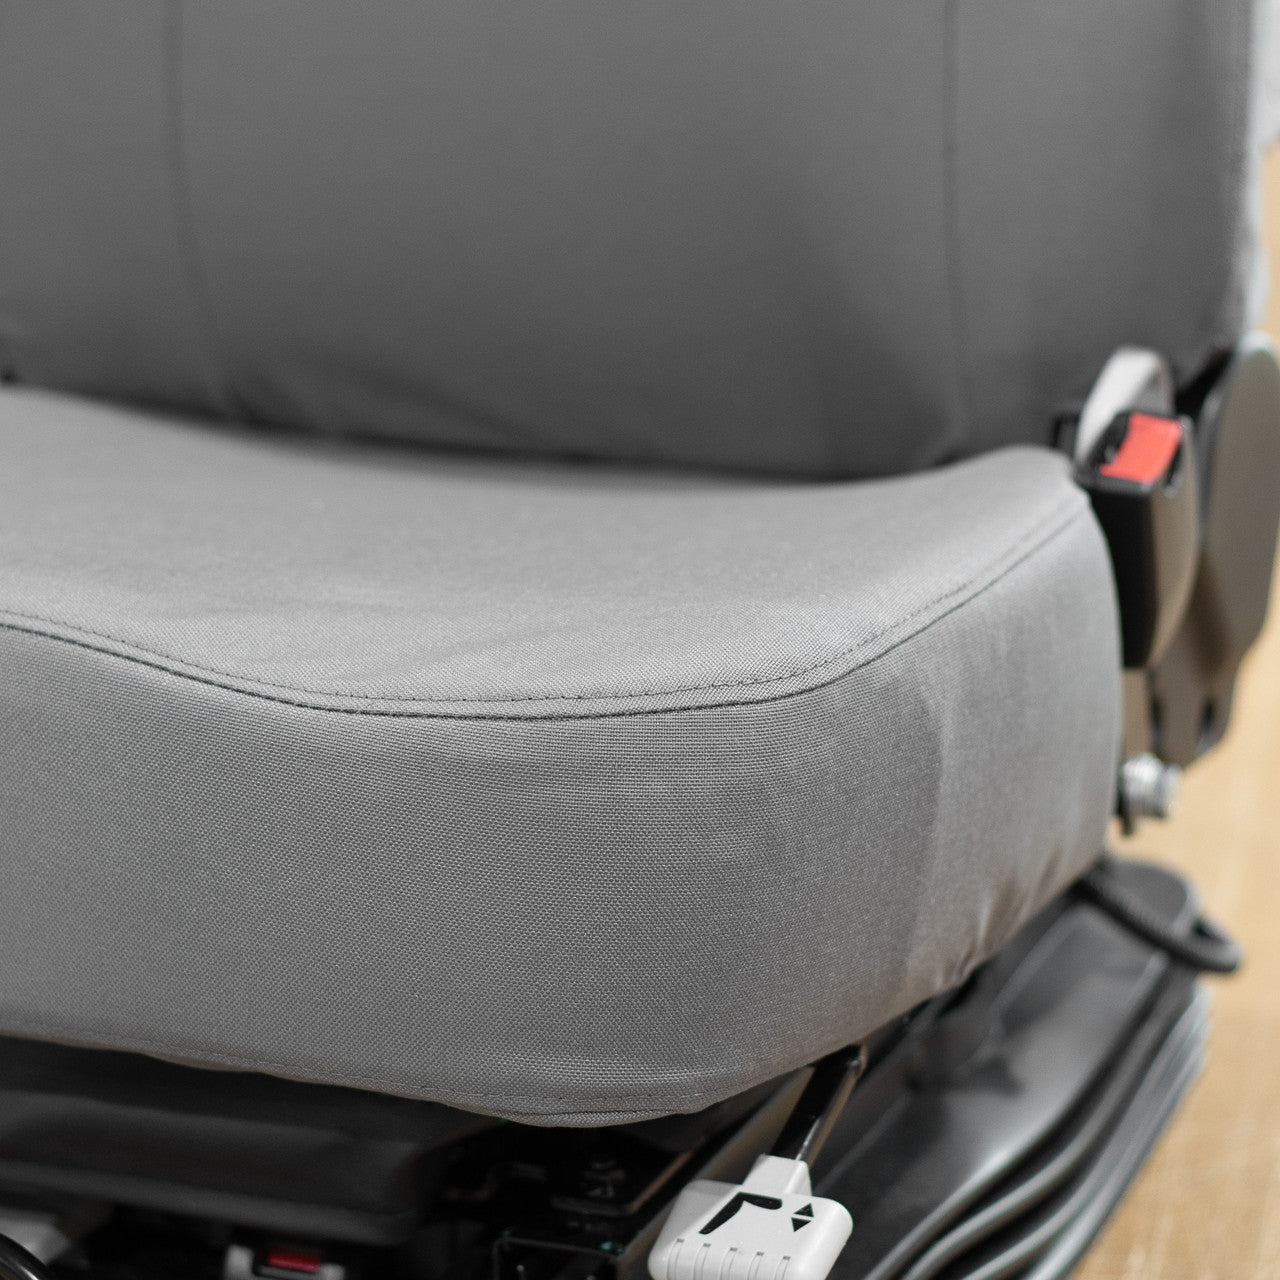 This Case & Link-Belt Excavator Seat Cover is built from 1000 Denier Cordura, has a lifetime warranty